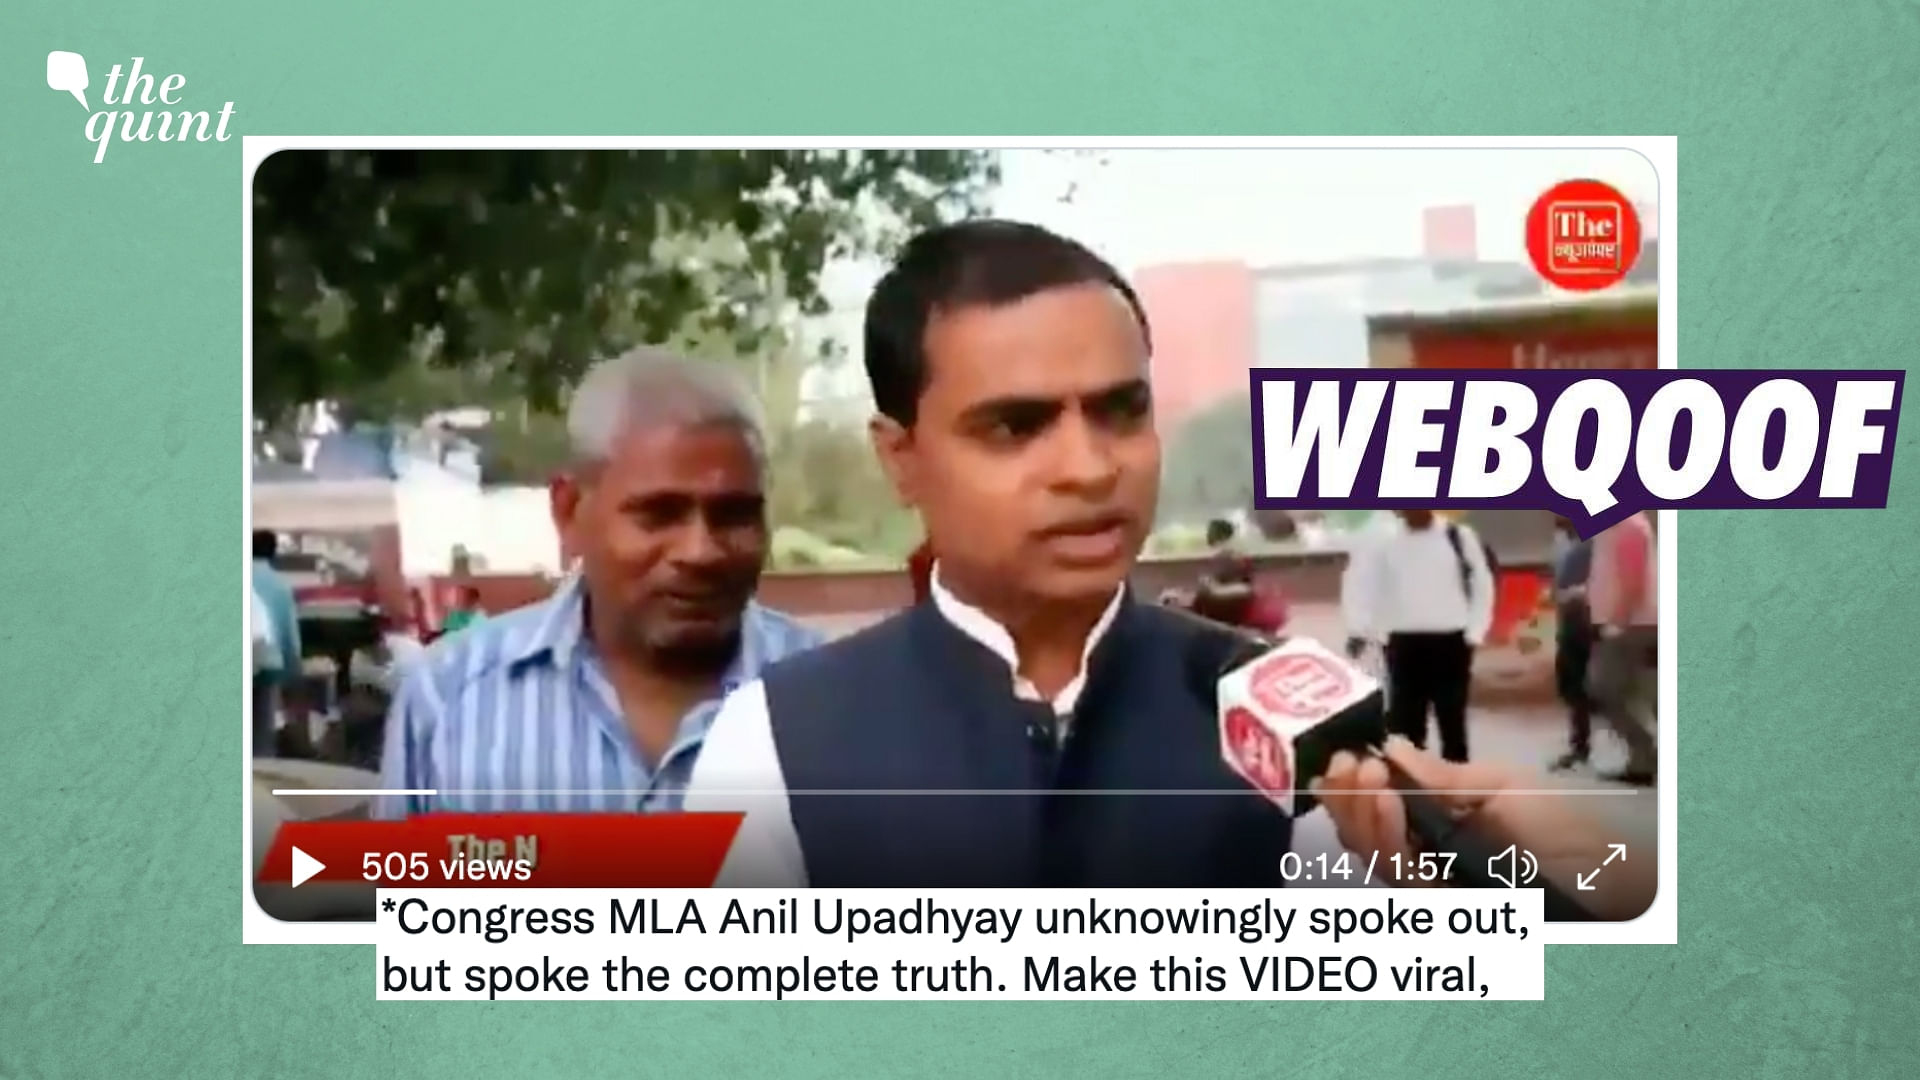 <div class="paragraphs"><p>The claim says that the man in the video is Congress MLA Anil Upadhyay.</p></div>